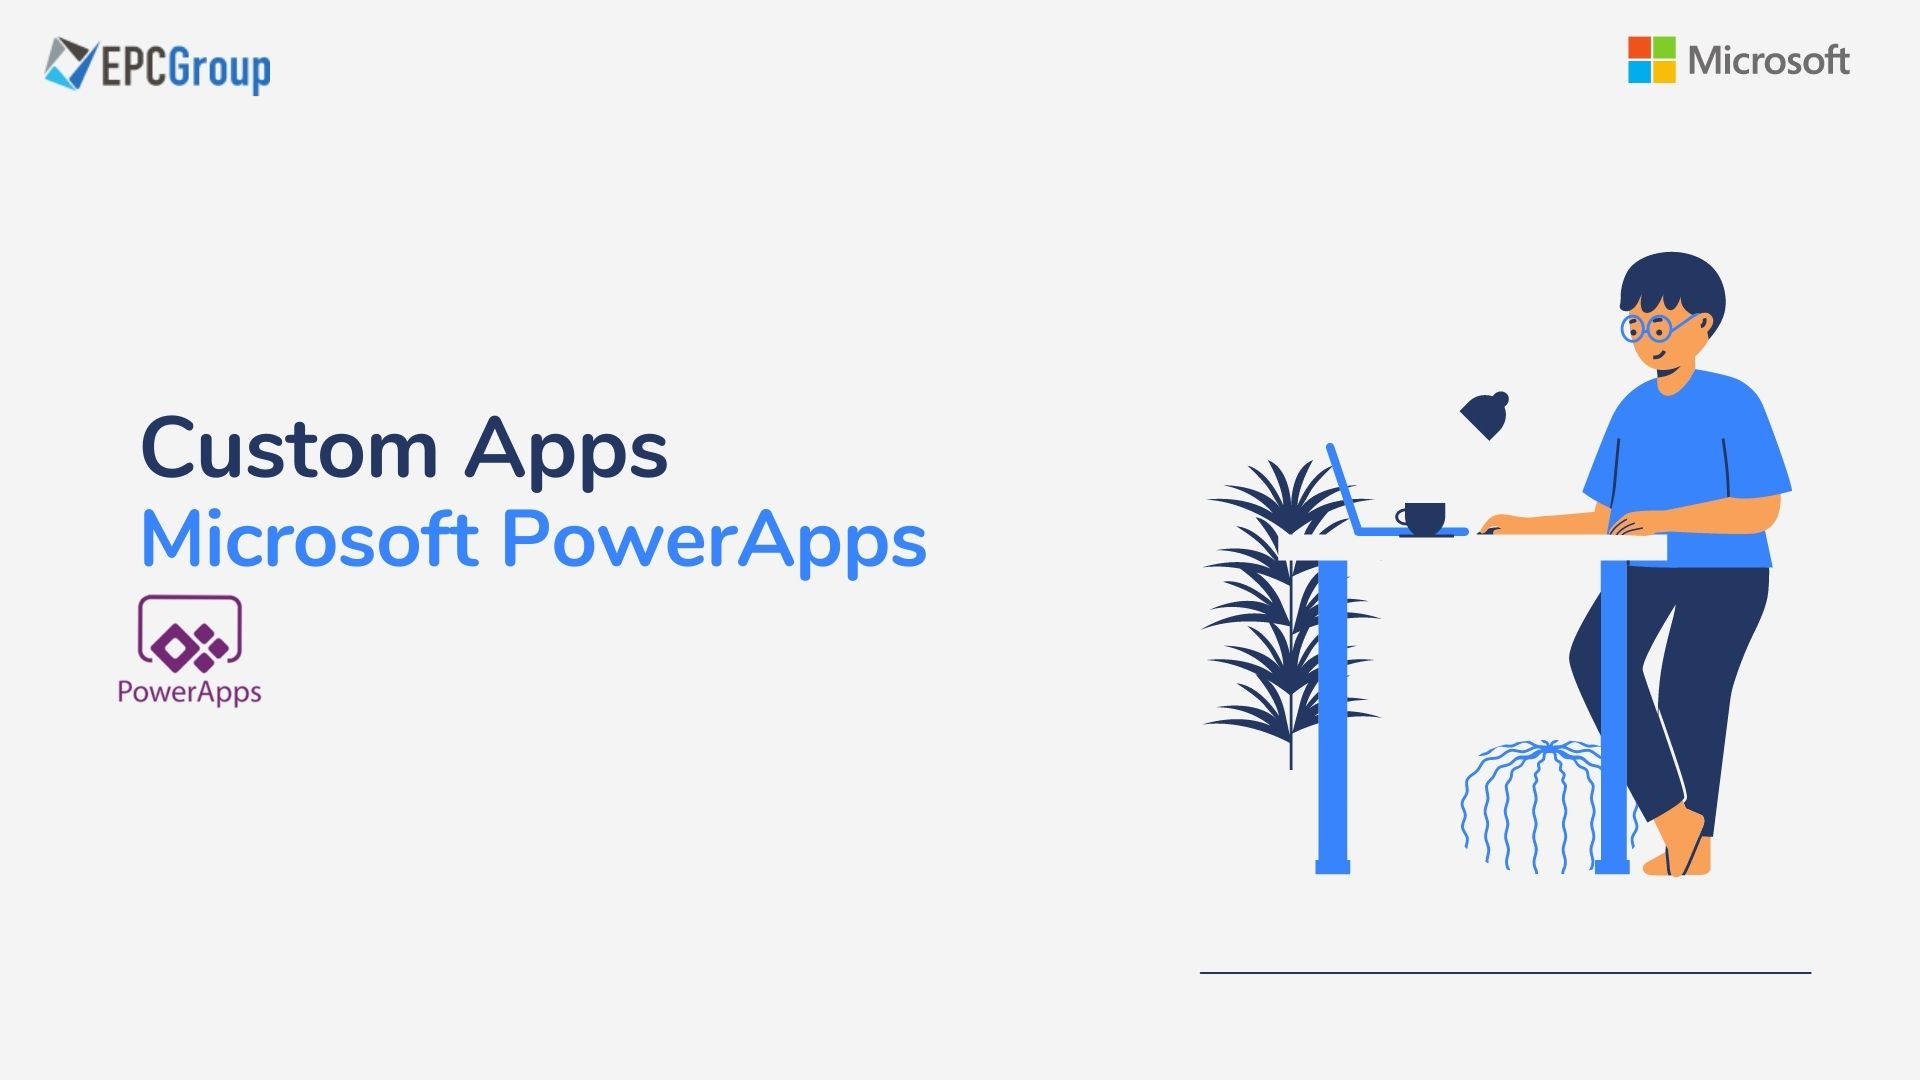 Building Custom Apps for Business Using Microsoft PowerApps